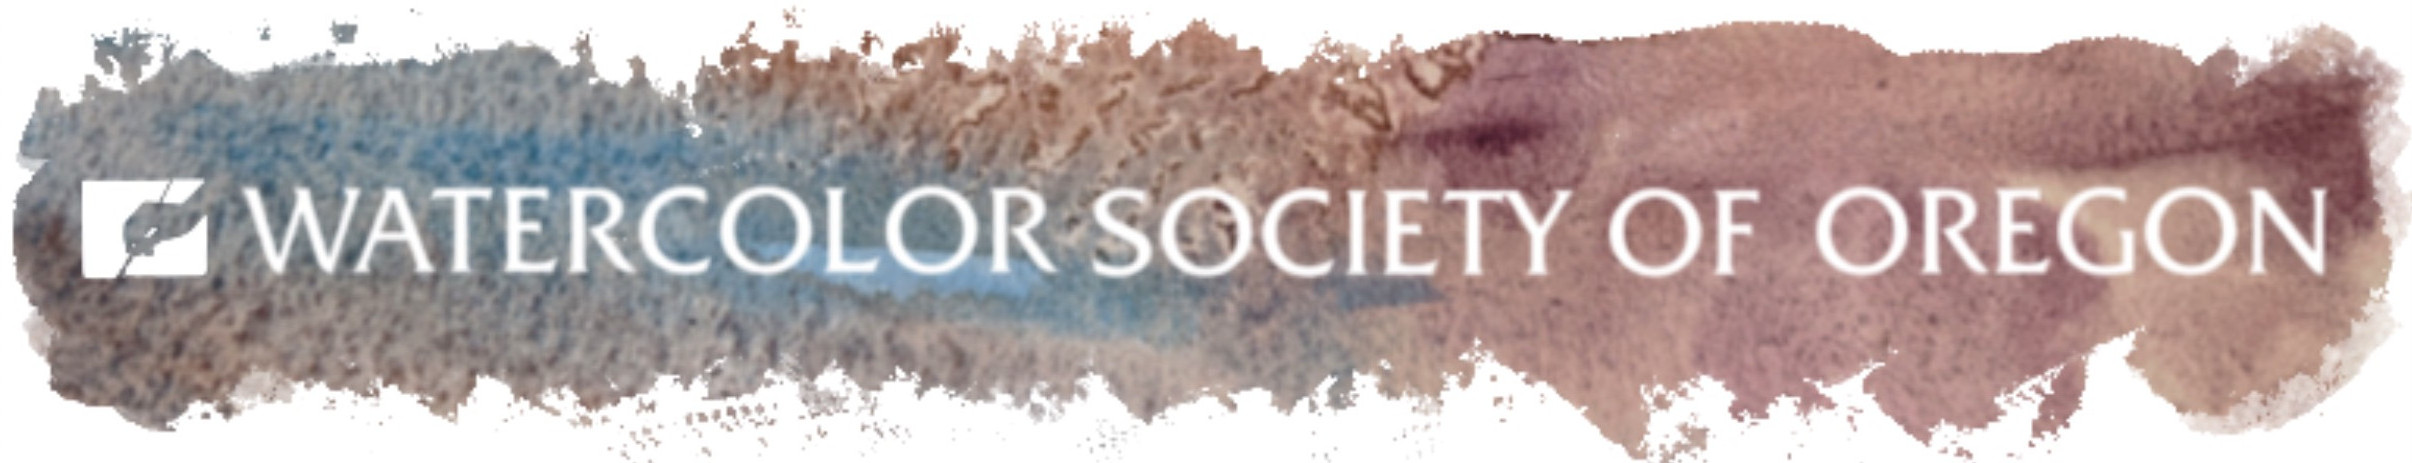 Watercolor Society of Oregon - Information for current & prospective WSO members